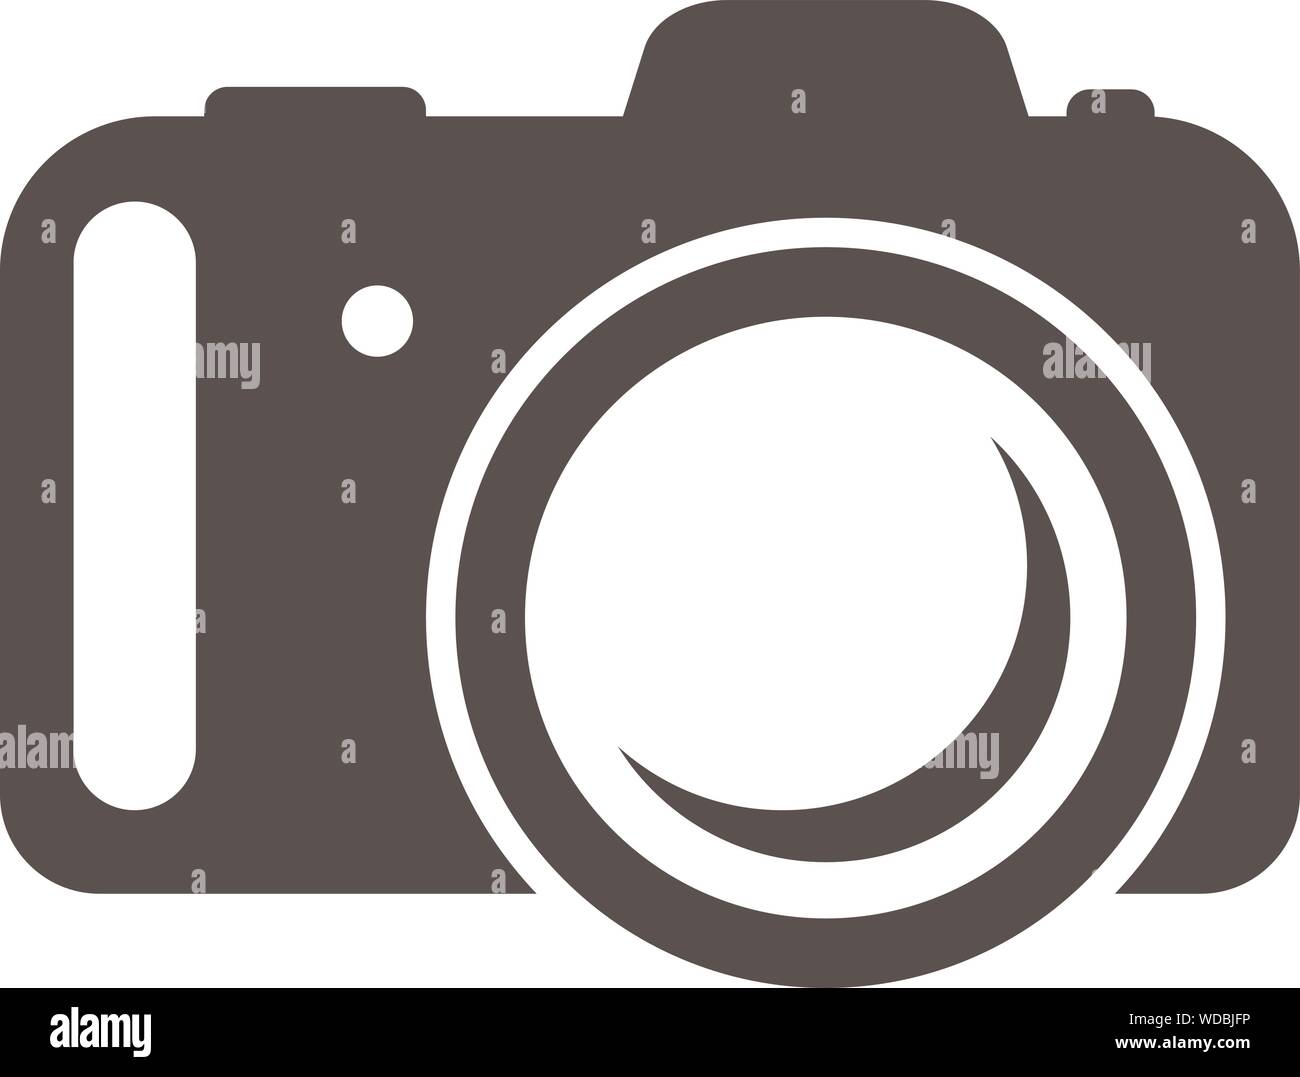 simple flat black and white camera icon vector illustration Stock Vector